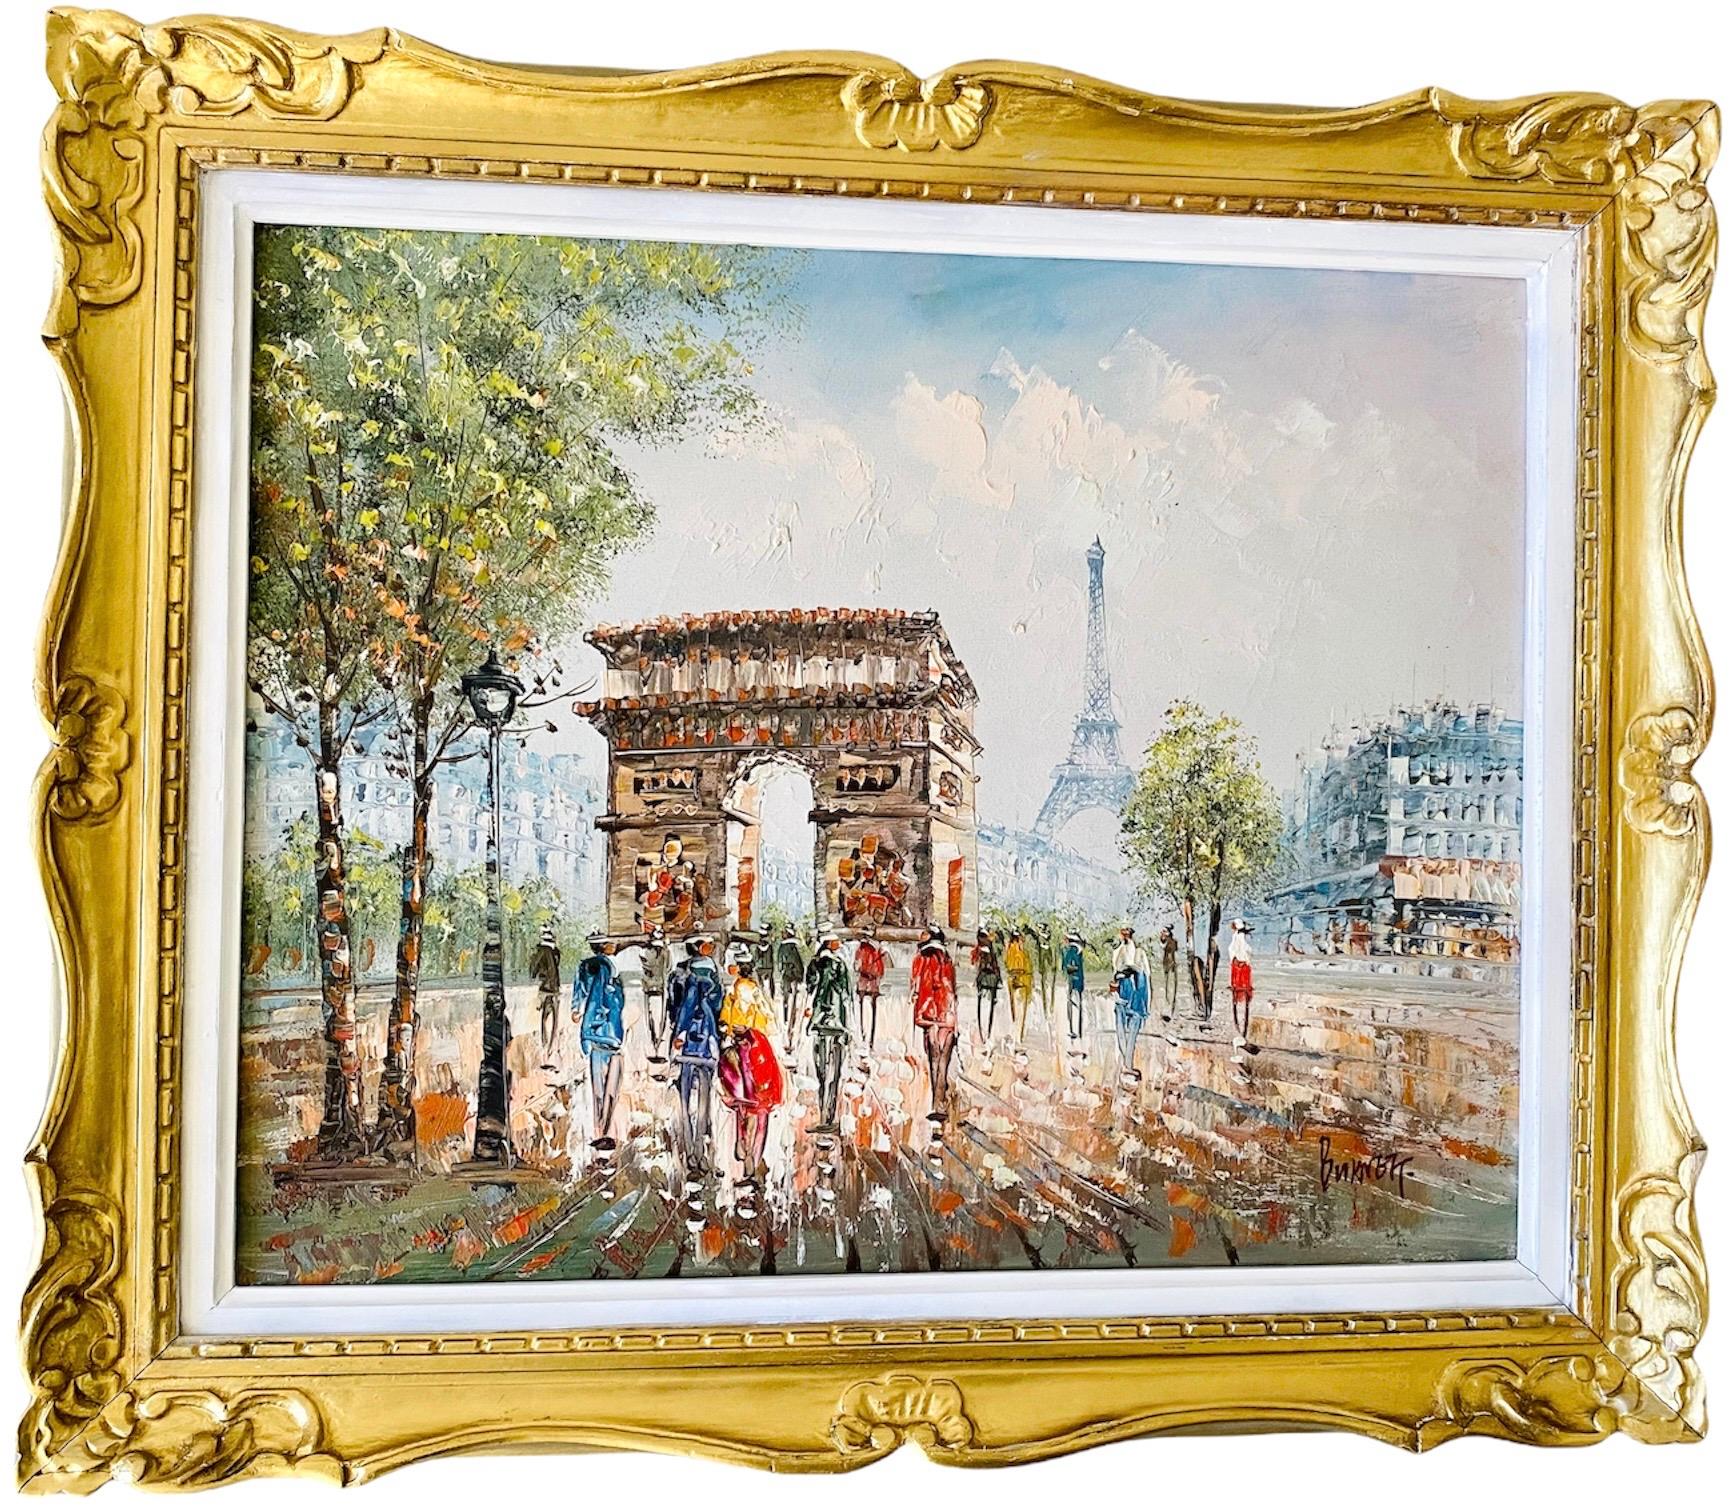 19th century style French impressionist cityscape of Paris - Arc de Triomphe - Painting by Unknown